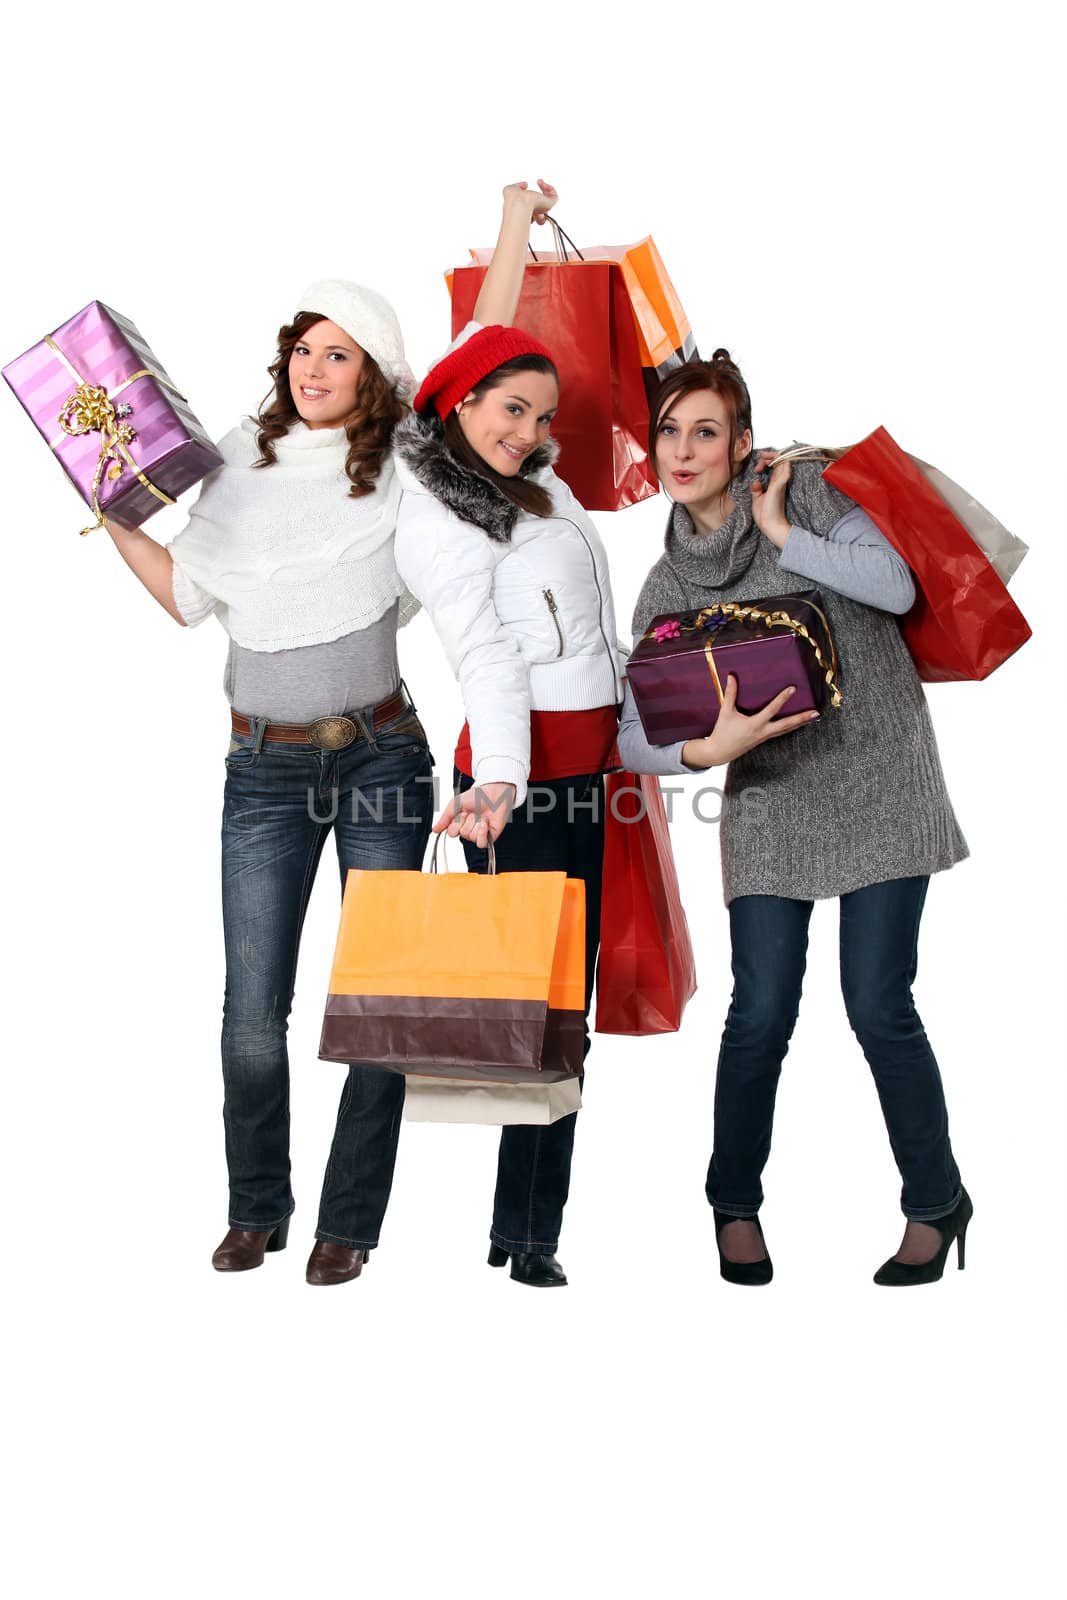 Women carrying bags and gifts